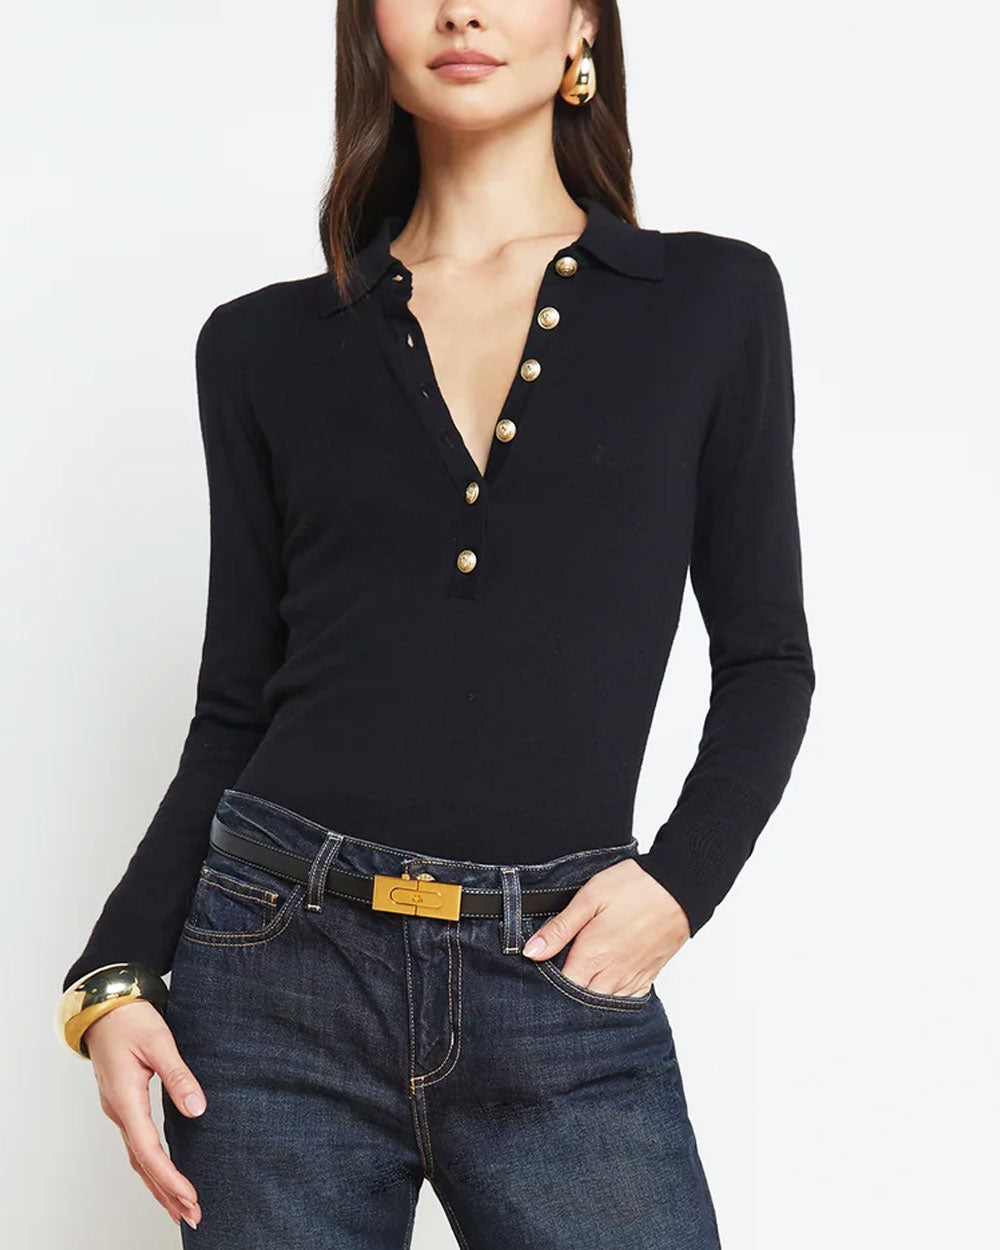 Black and Gold Sterling Collared Sweater